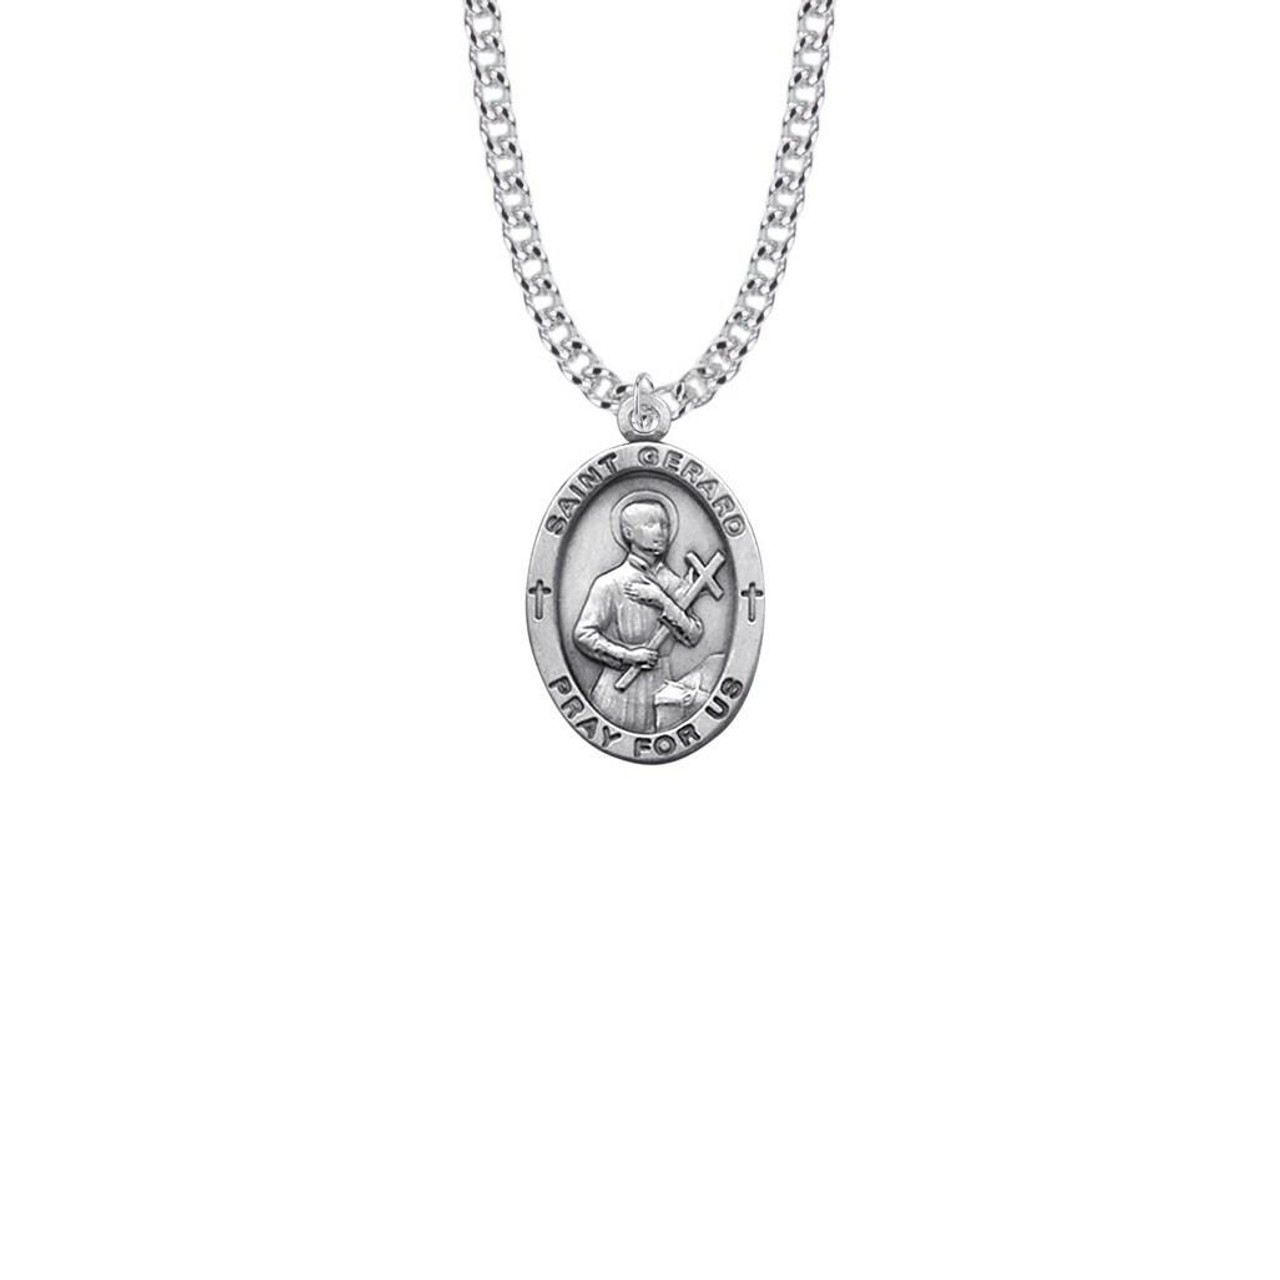 st gerard necklace sterling silver medal on 20 stainless chain sm8840sh sm8840sh 58310.1634357670